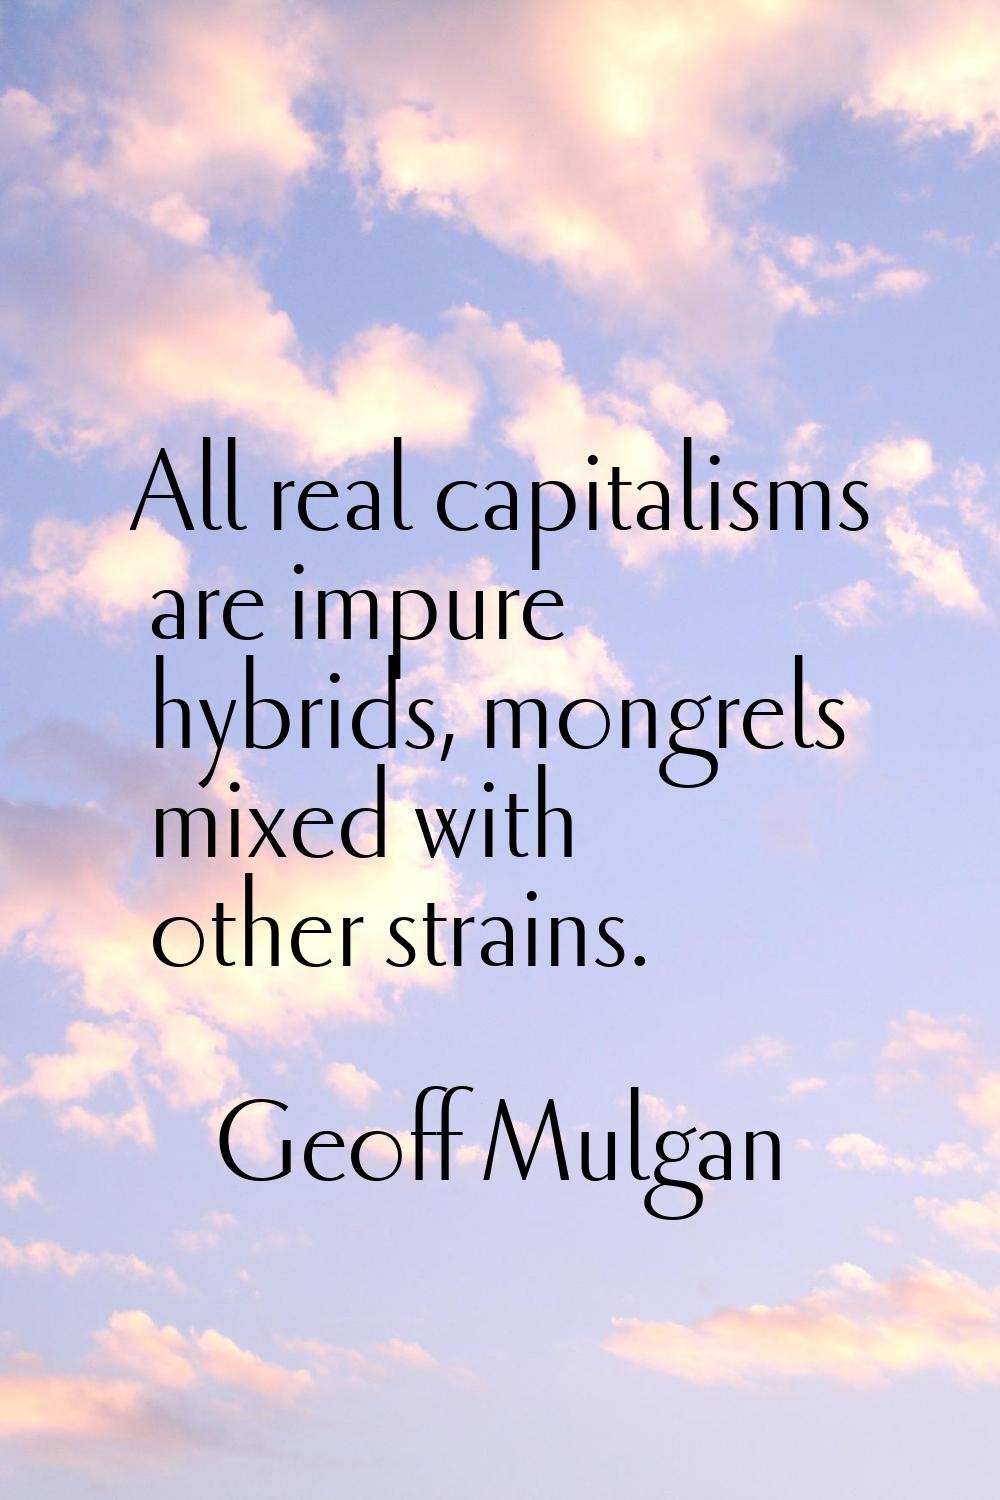 All real capitalisms are impure hybrids, mongrels mixed with other strains.